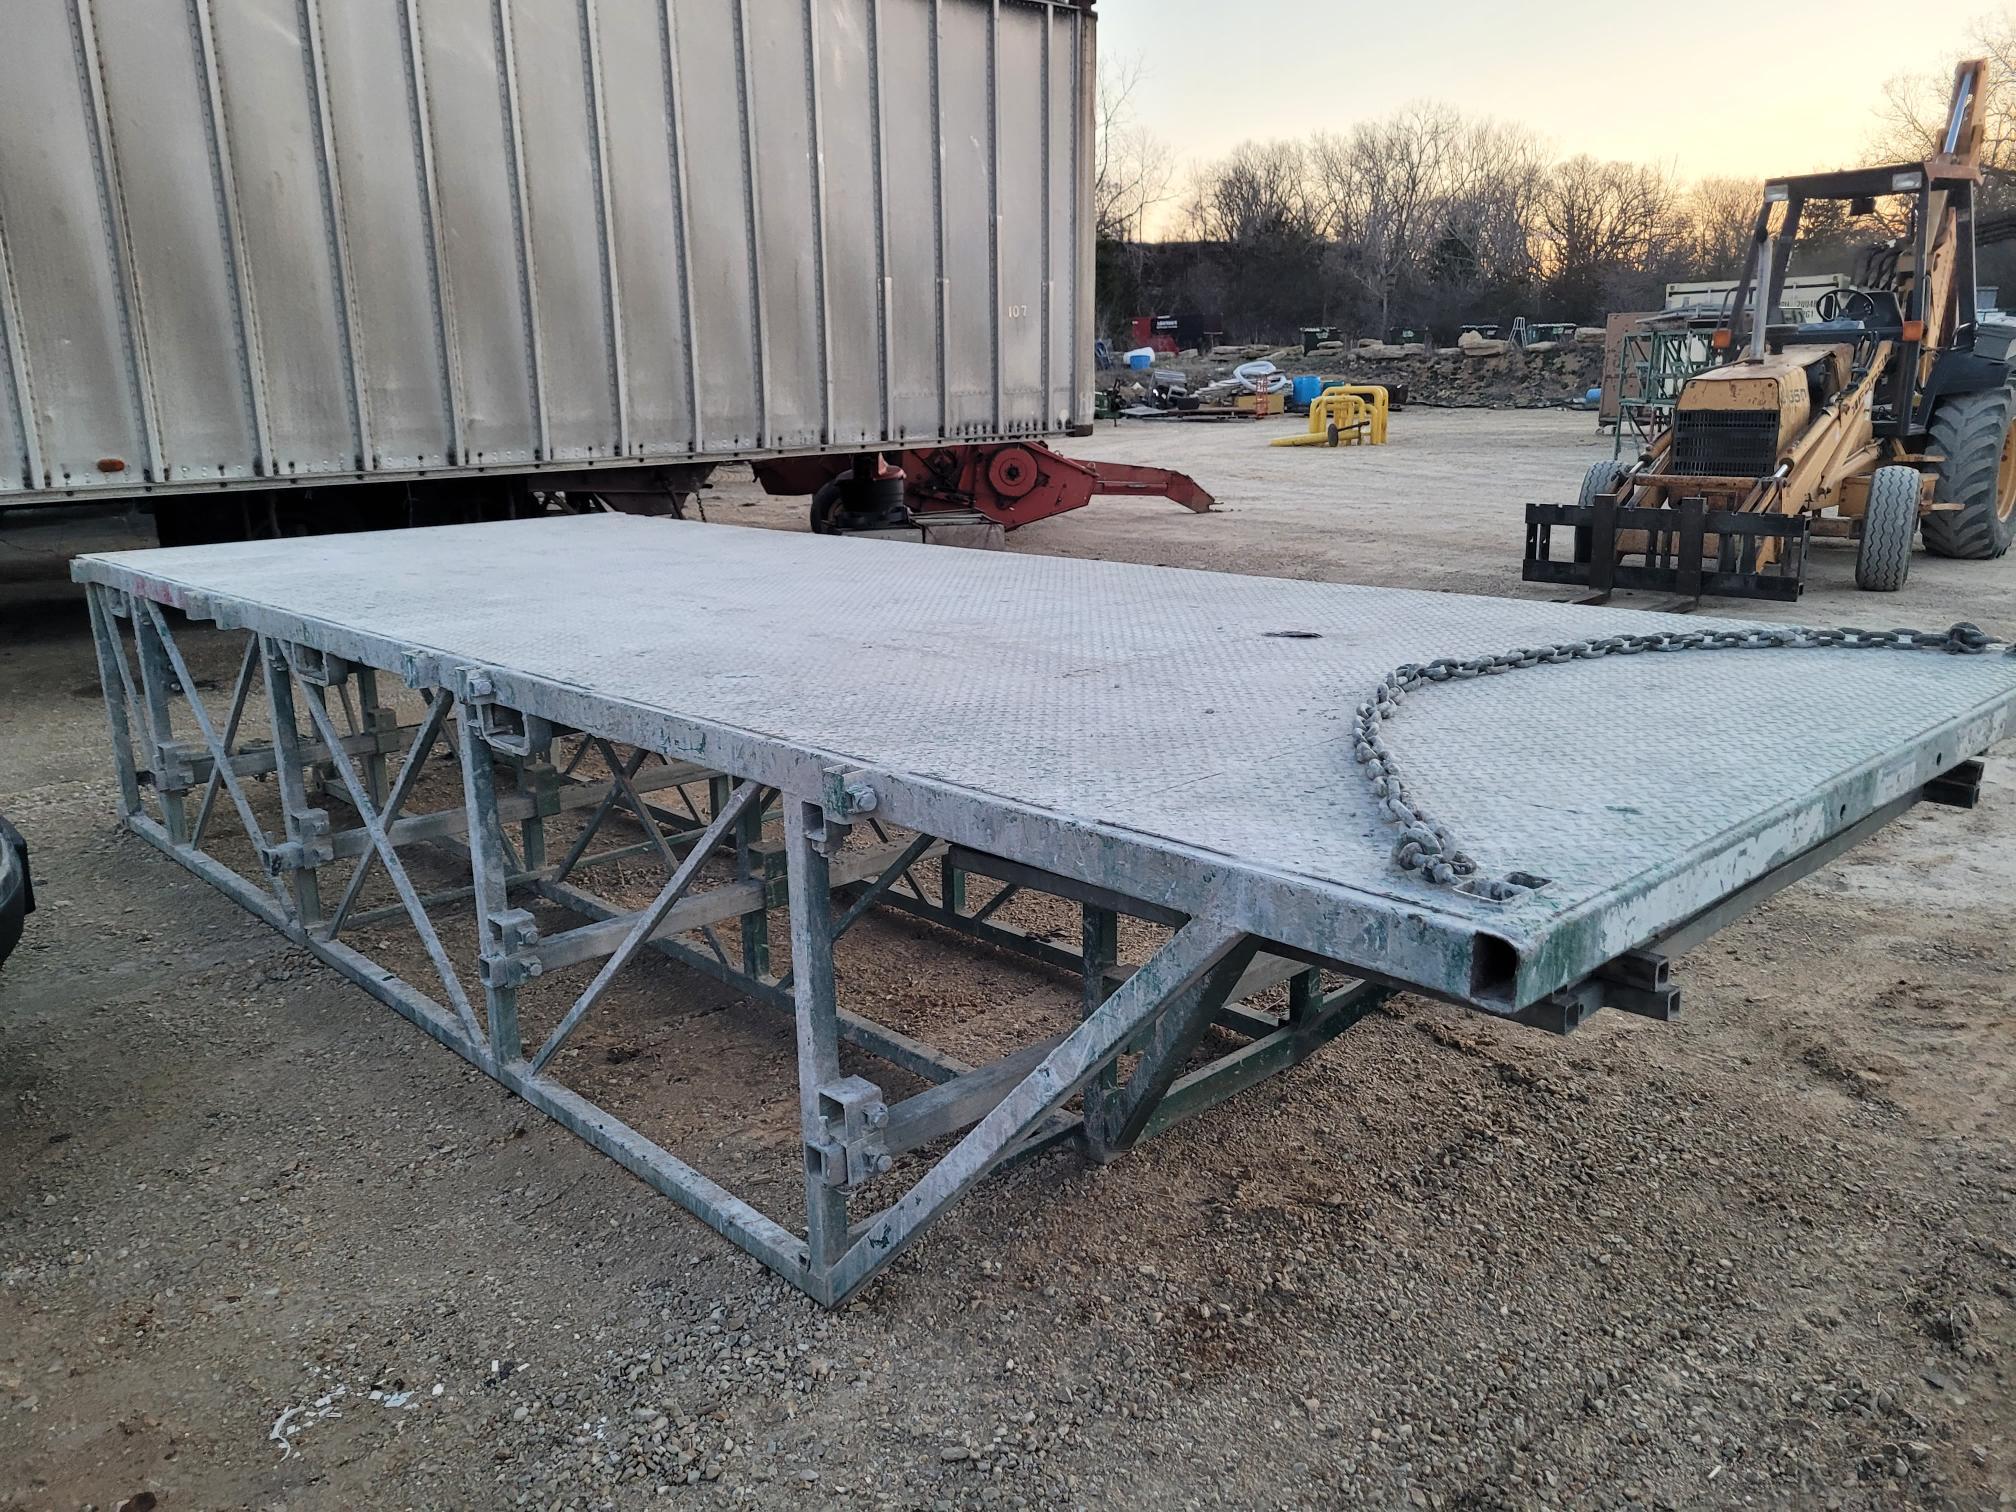 Hydro Mobile 18 Foot Wing